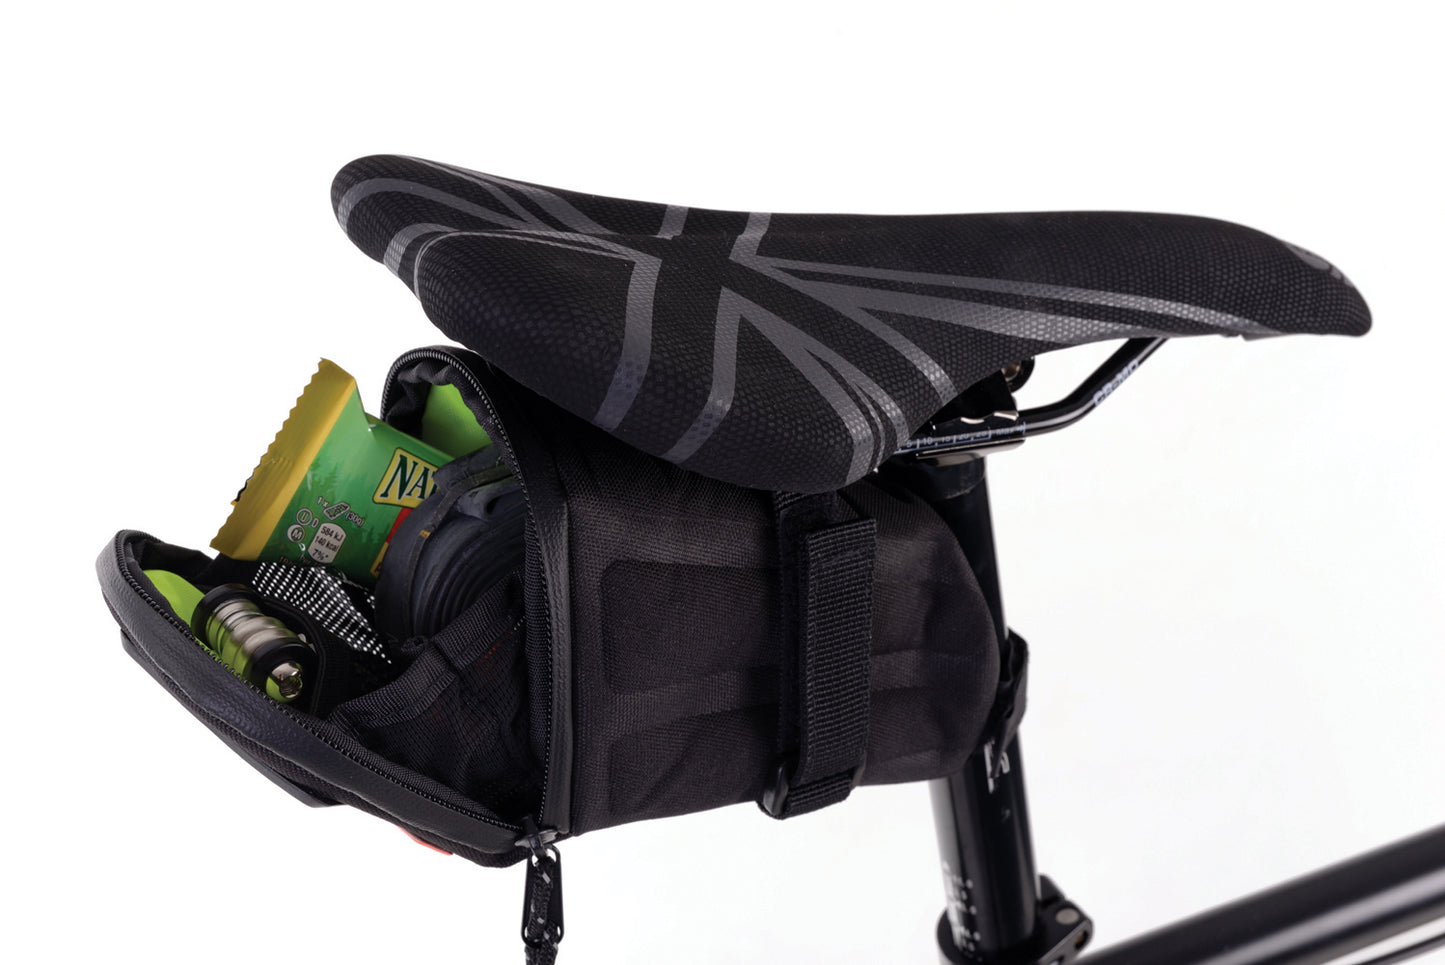 Passport Frequent Flyer Seat Saddle Pack - Black